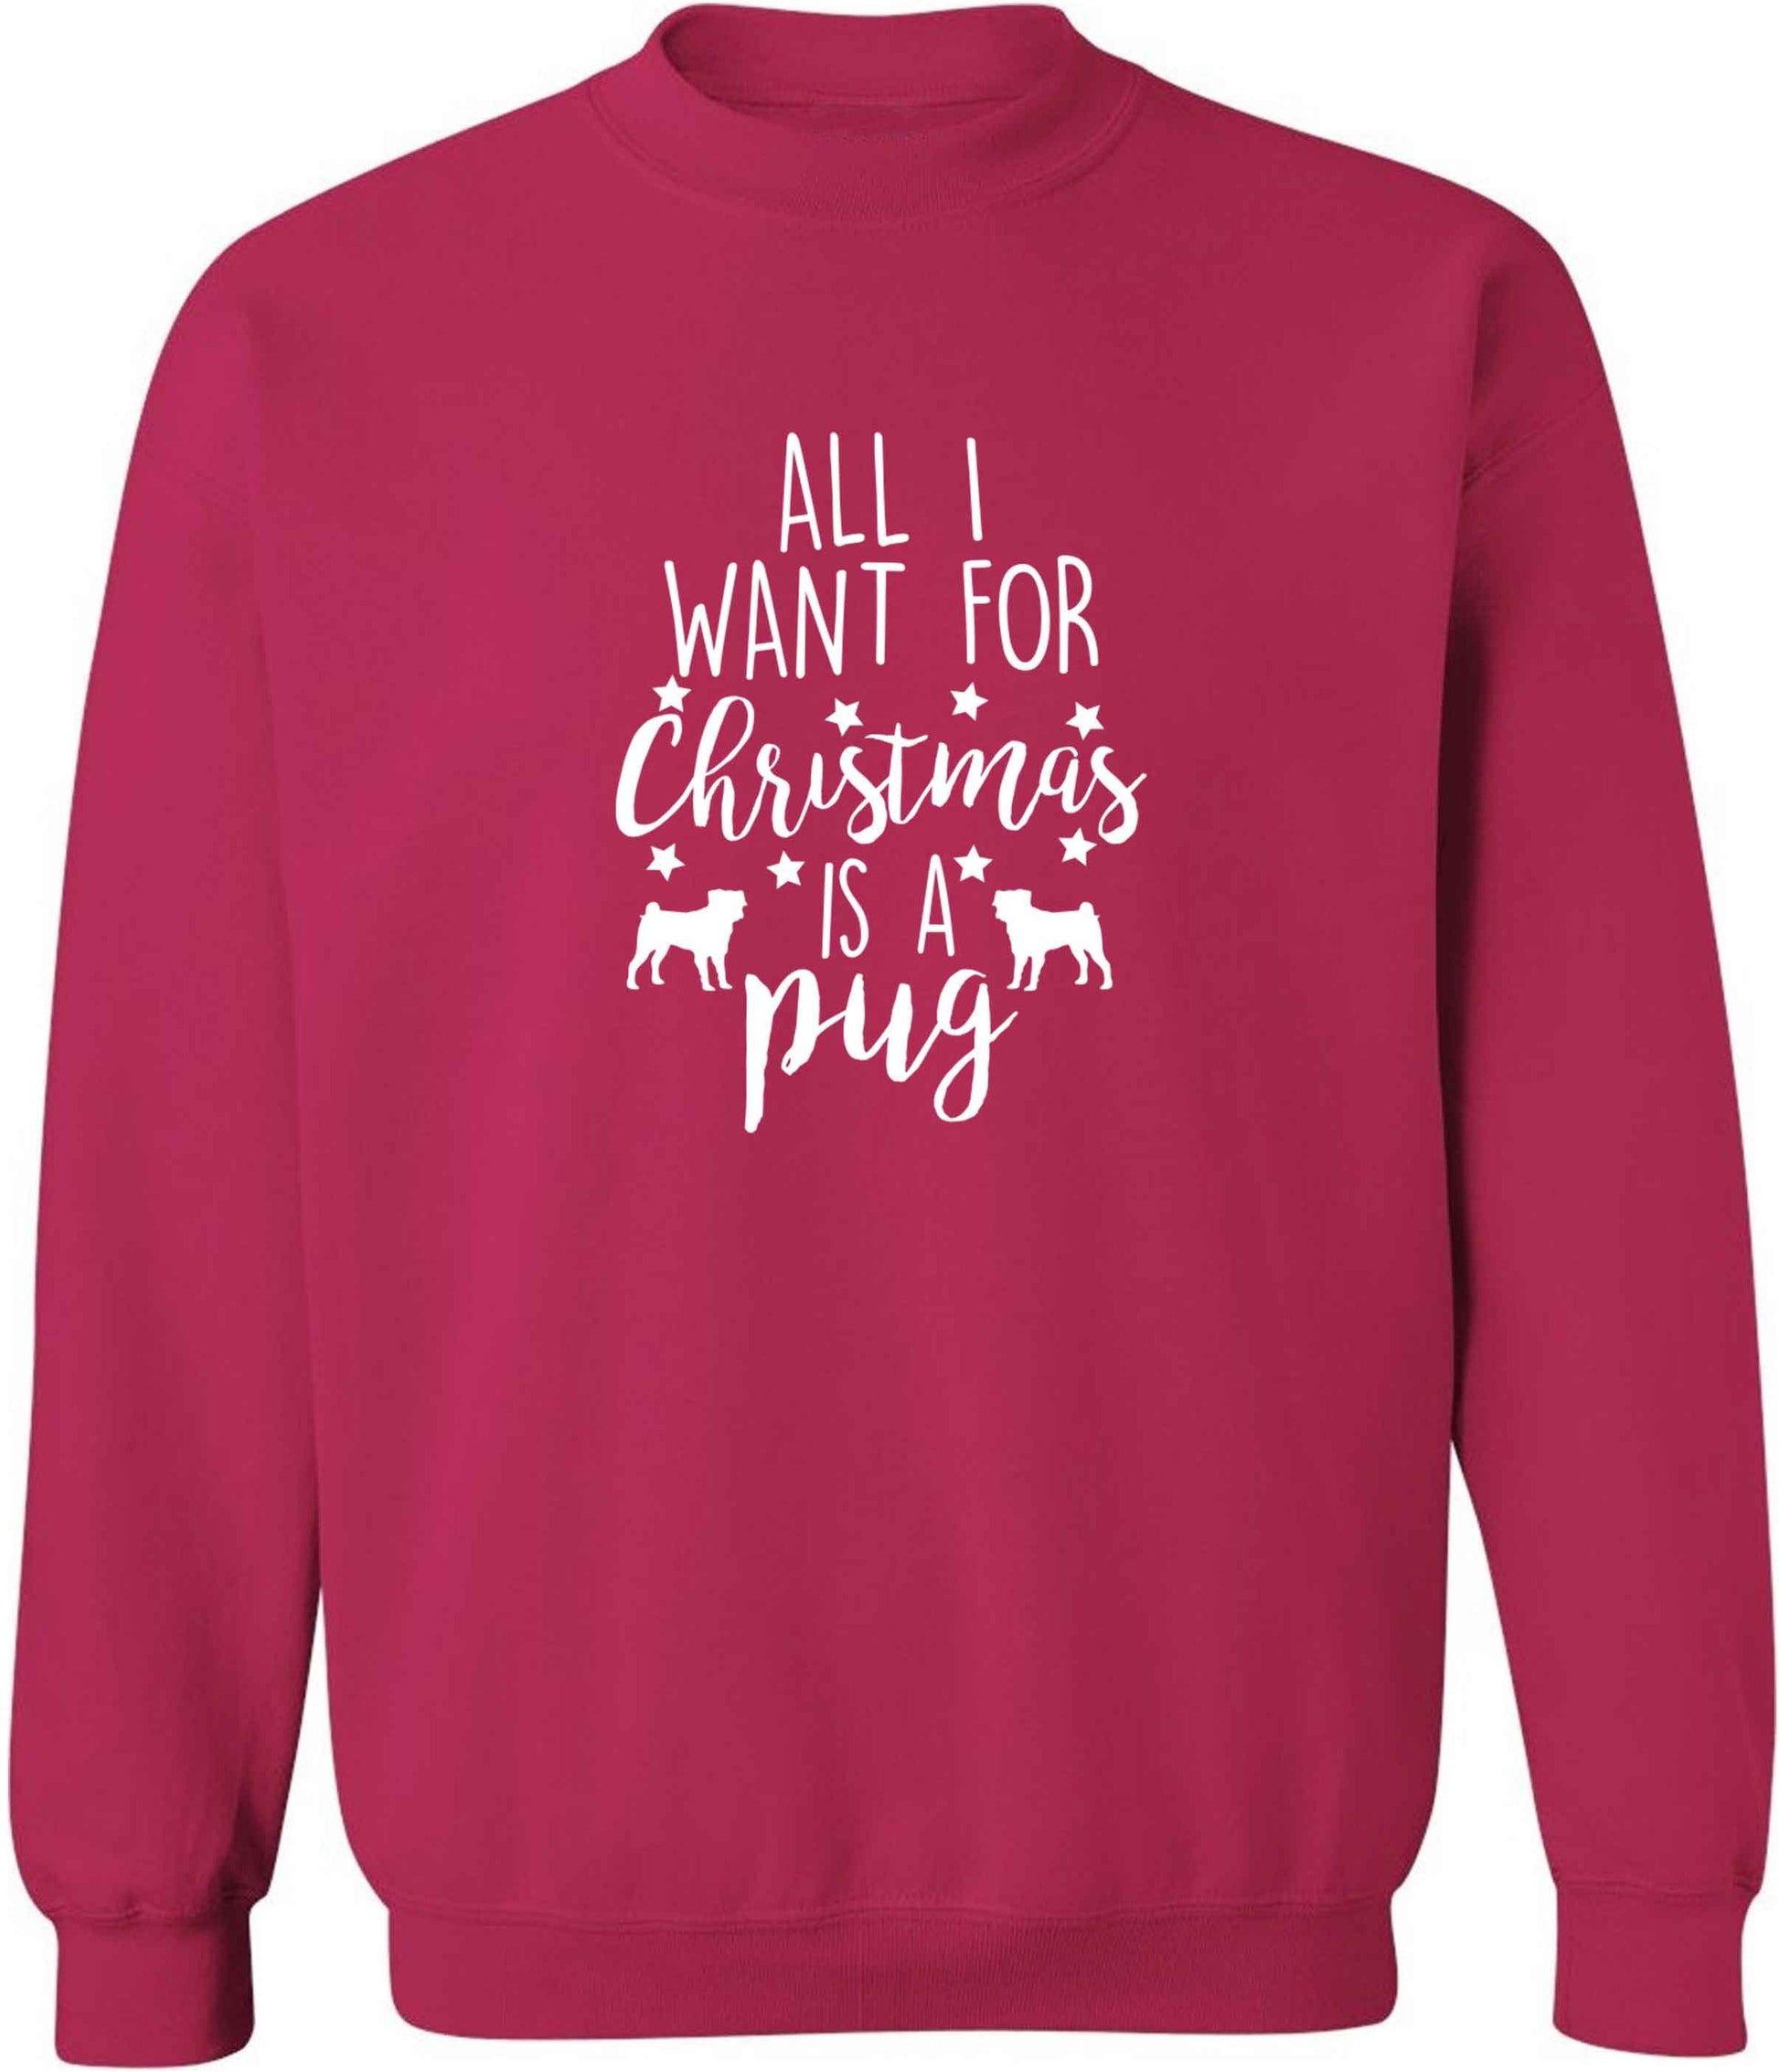 All I want for Christmas is a pug adult's unisex pink sweater 2XL